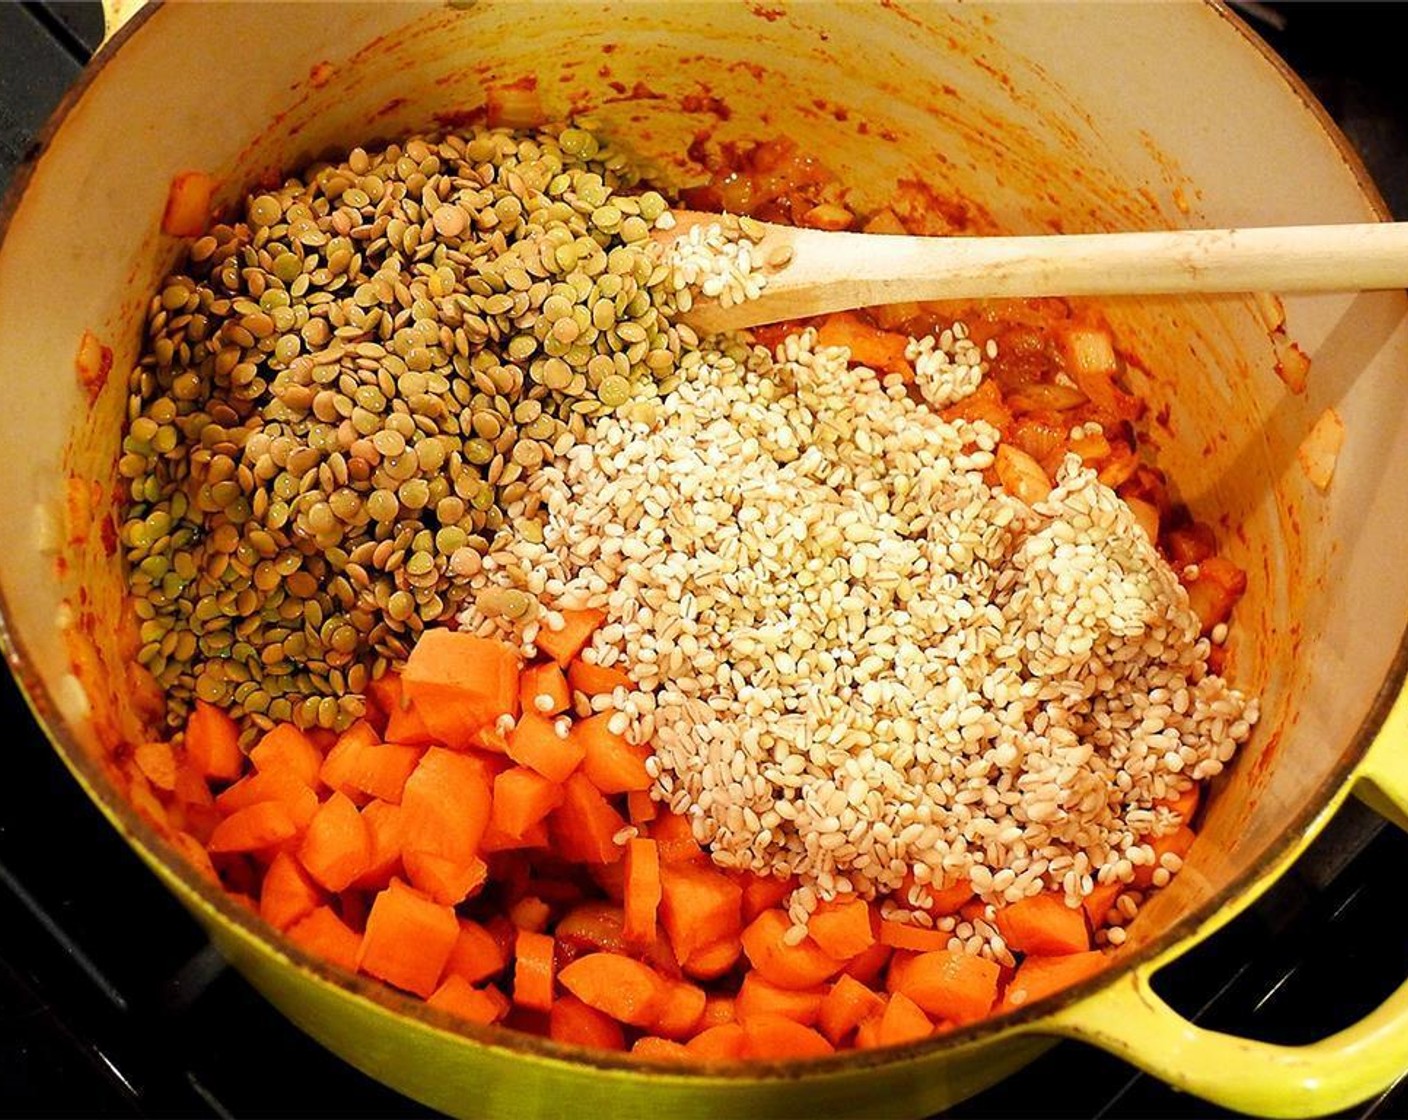 step 3 Add the Red Lentils (1/3 cup), Bulgur Wheat (1/2 cup), Carrot (1) and Vegetable Broth (2 1/2 cups). Turn the heat up so that the mixture is simmering.